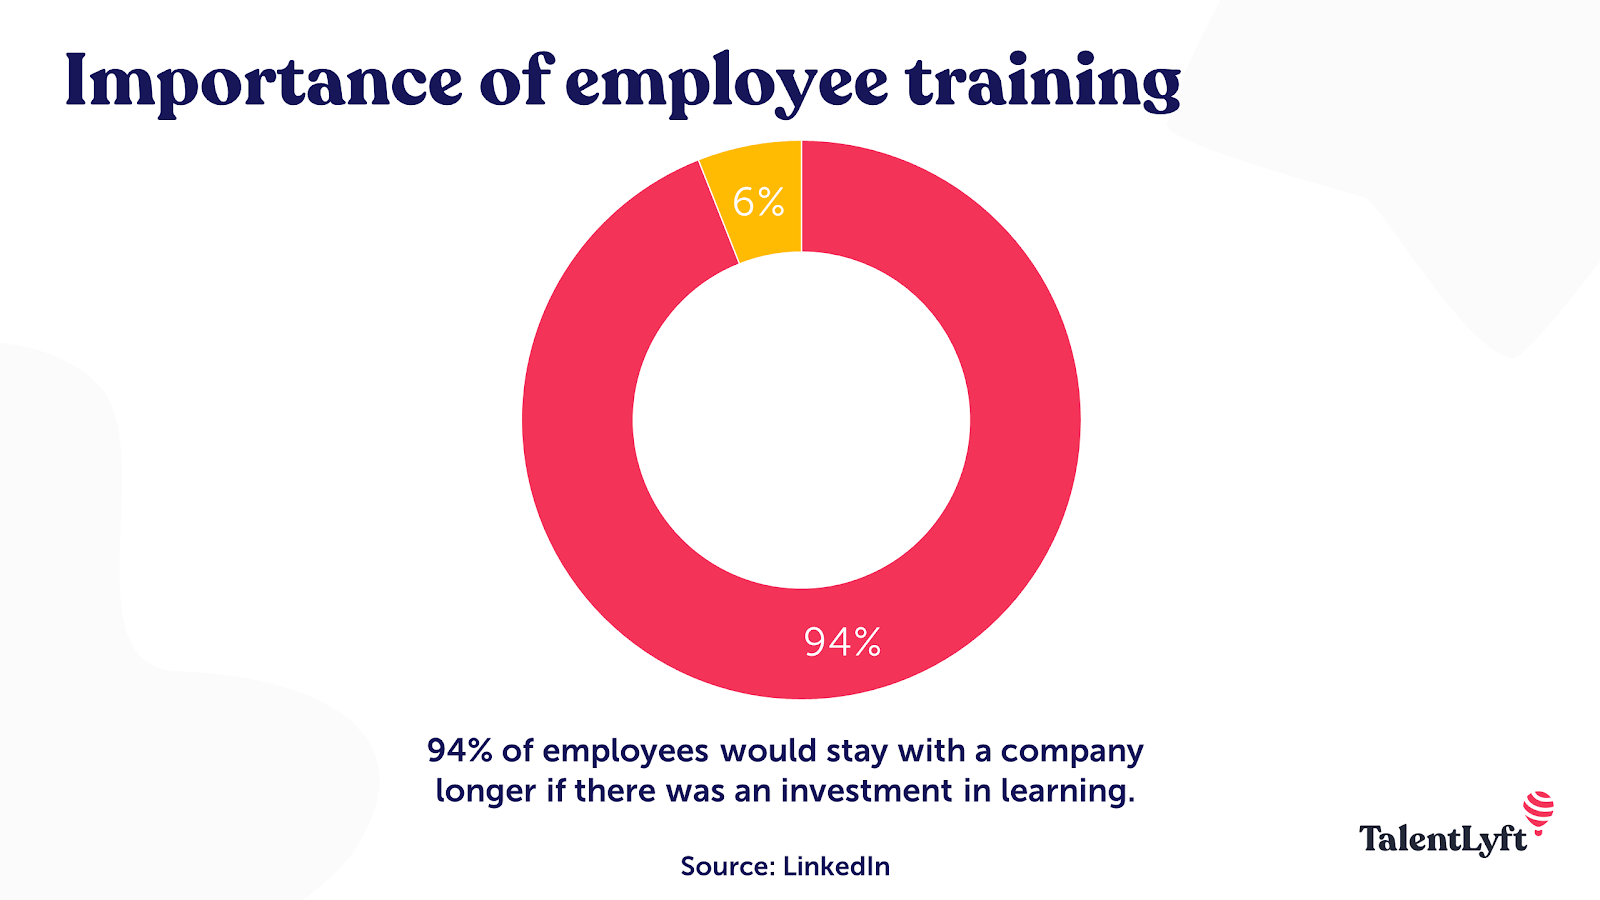 Employee training - an important benefit for remote employees